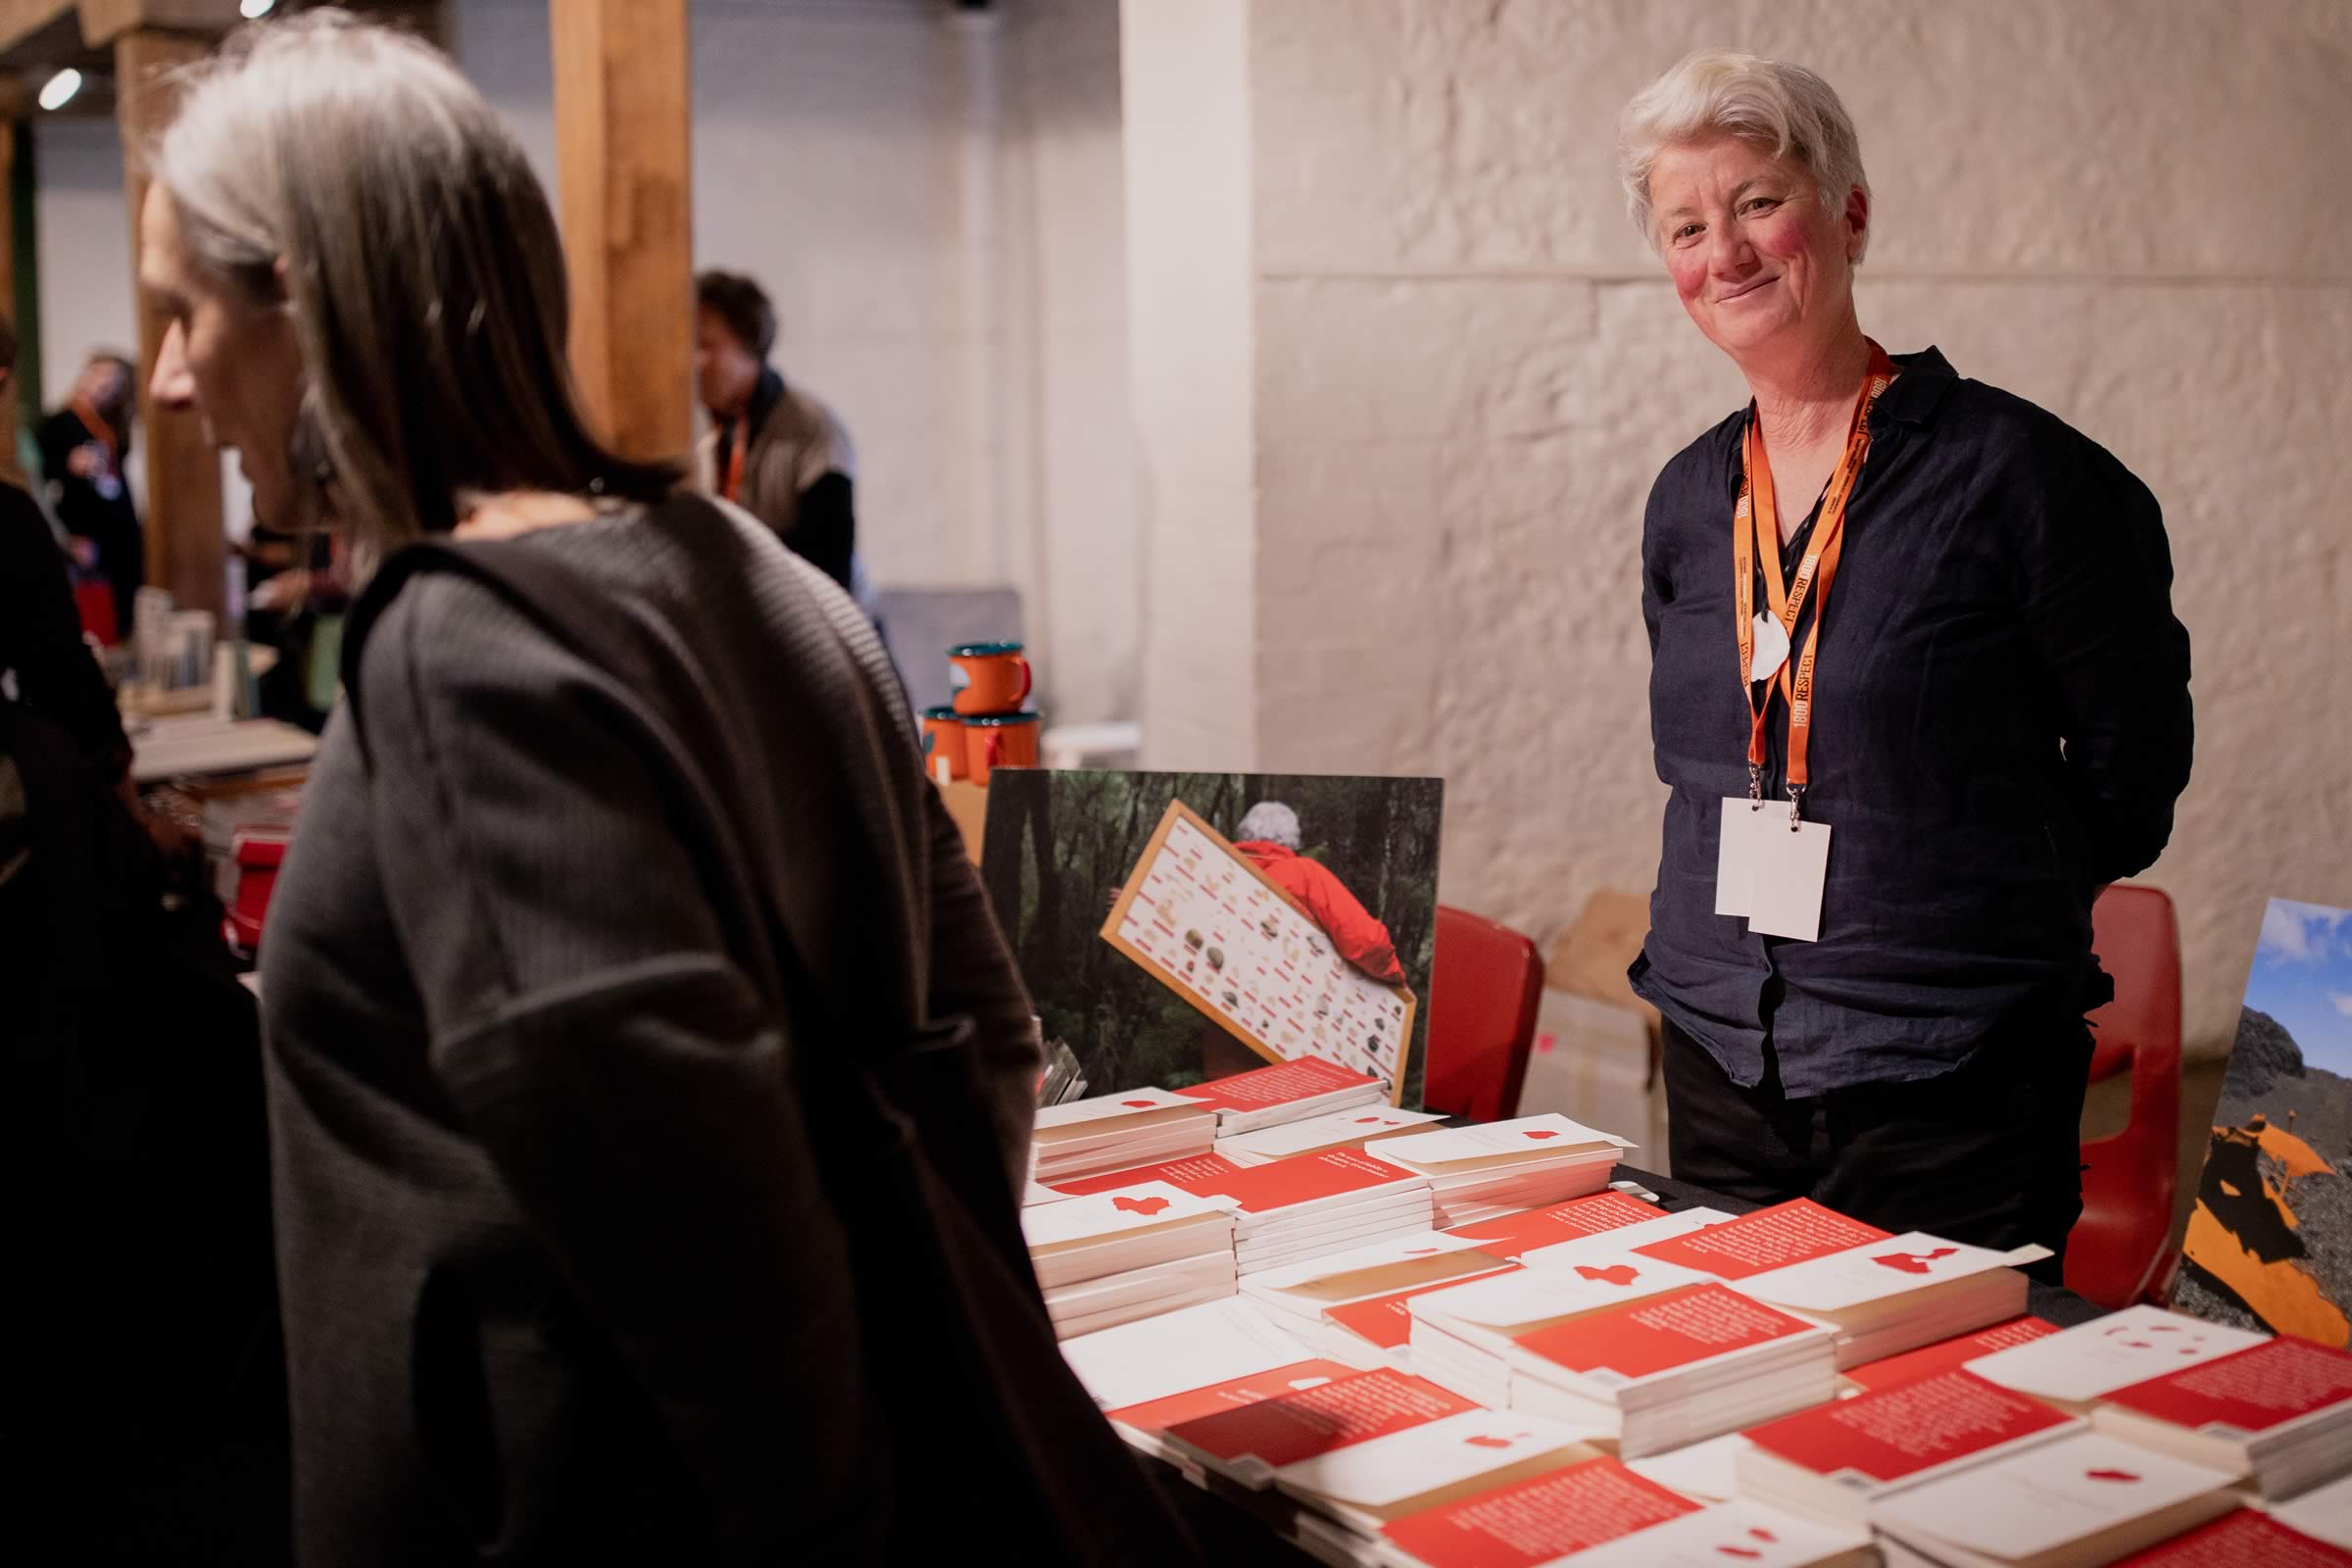 Photo of a smiling woman stallholder (event organiser, Margaret Woodward) standing behind a display of red and white covered books, with a woman walking past the stall in the foreground. Photo: Rosie Hastie for The People’s Library 2018.